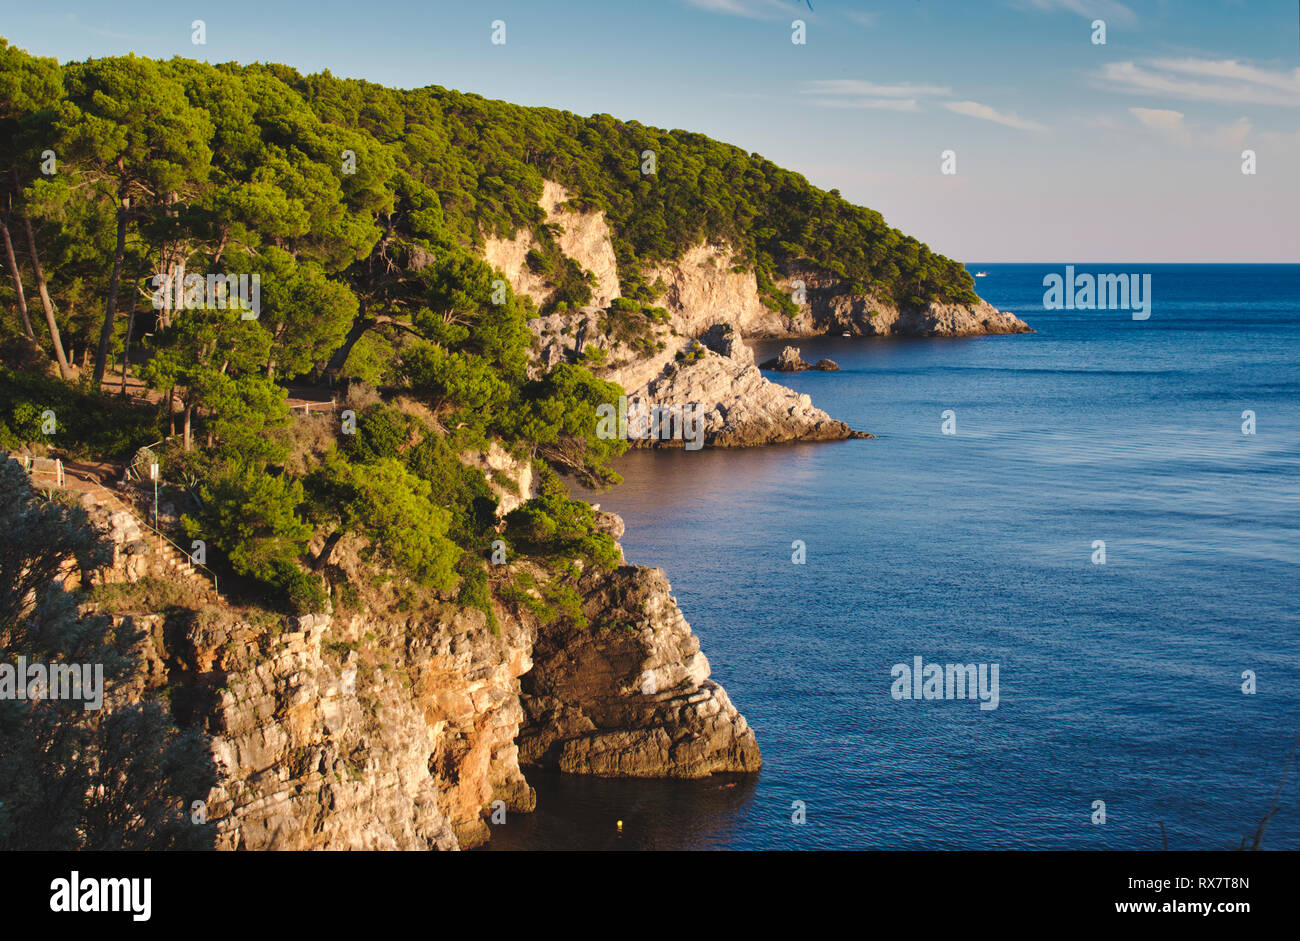 Cliff face with forest trees on a Mediterranean island with blue sea and sky Stock Photo